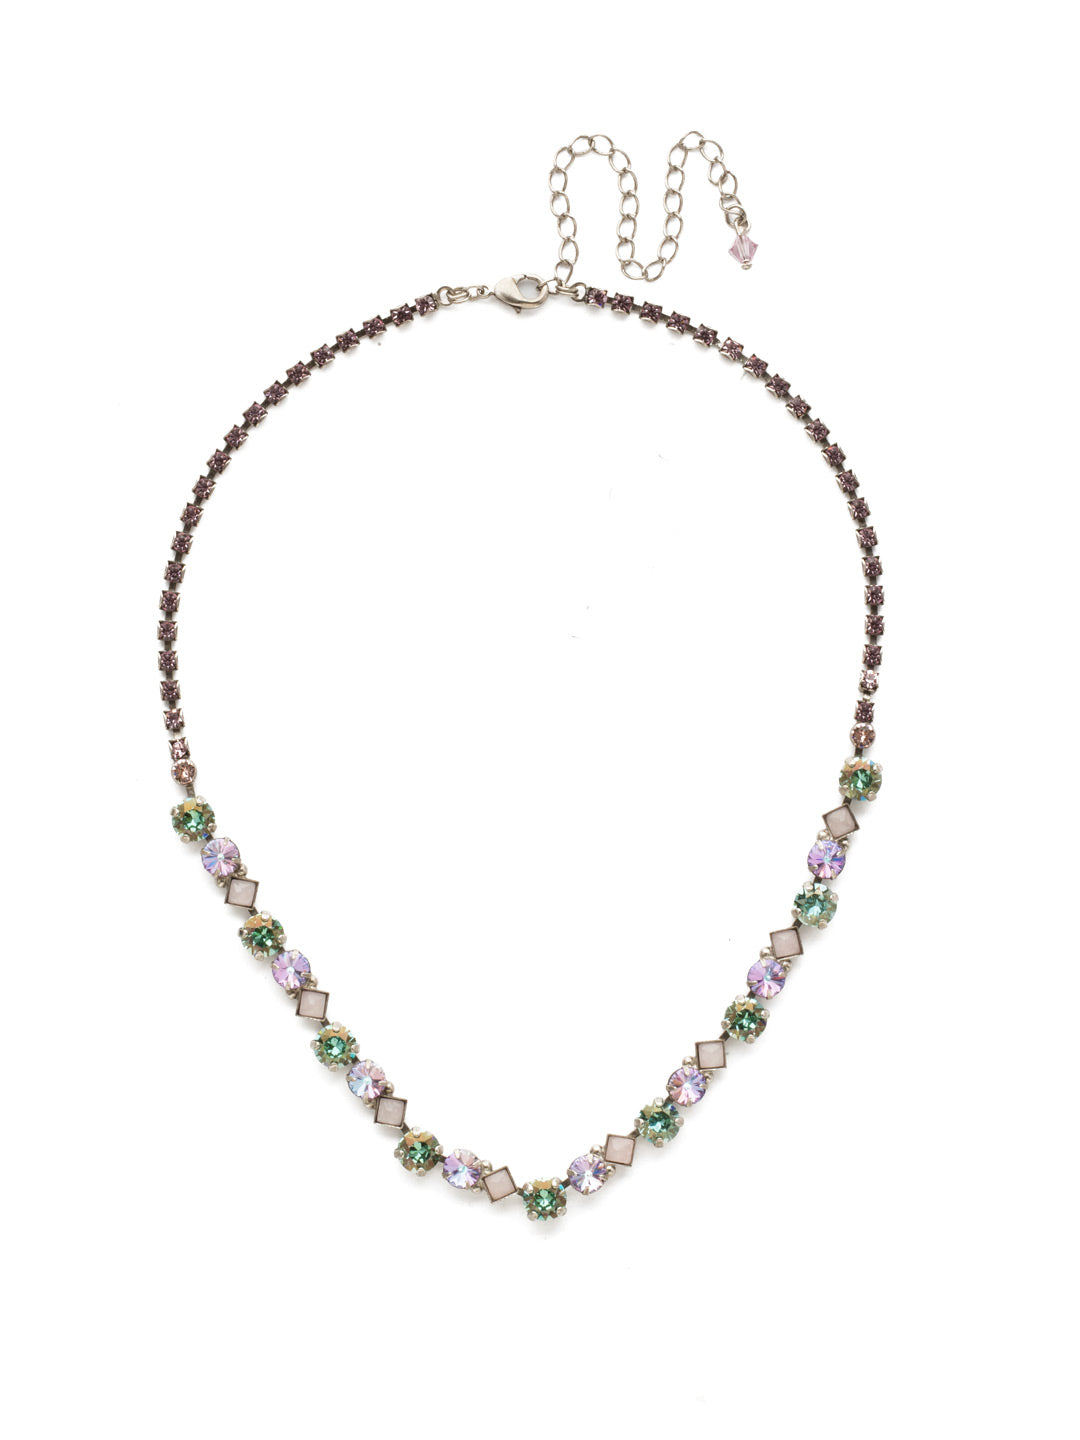 Dazzling Diamonds Line Necklace - NDN36ASLPA - Diamond-shaped semiprecious stones are accented by shimmering, round crystals in this classic necklace.